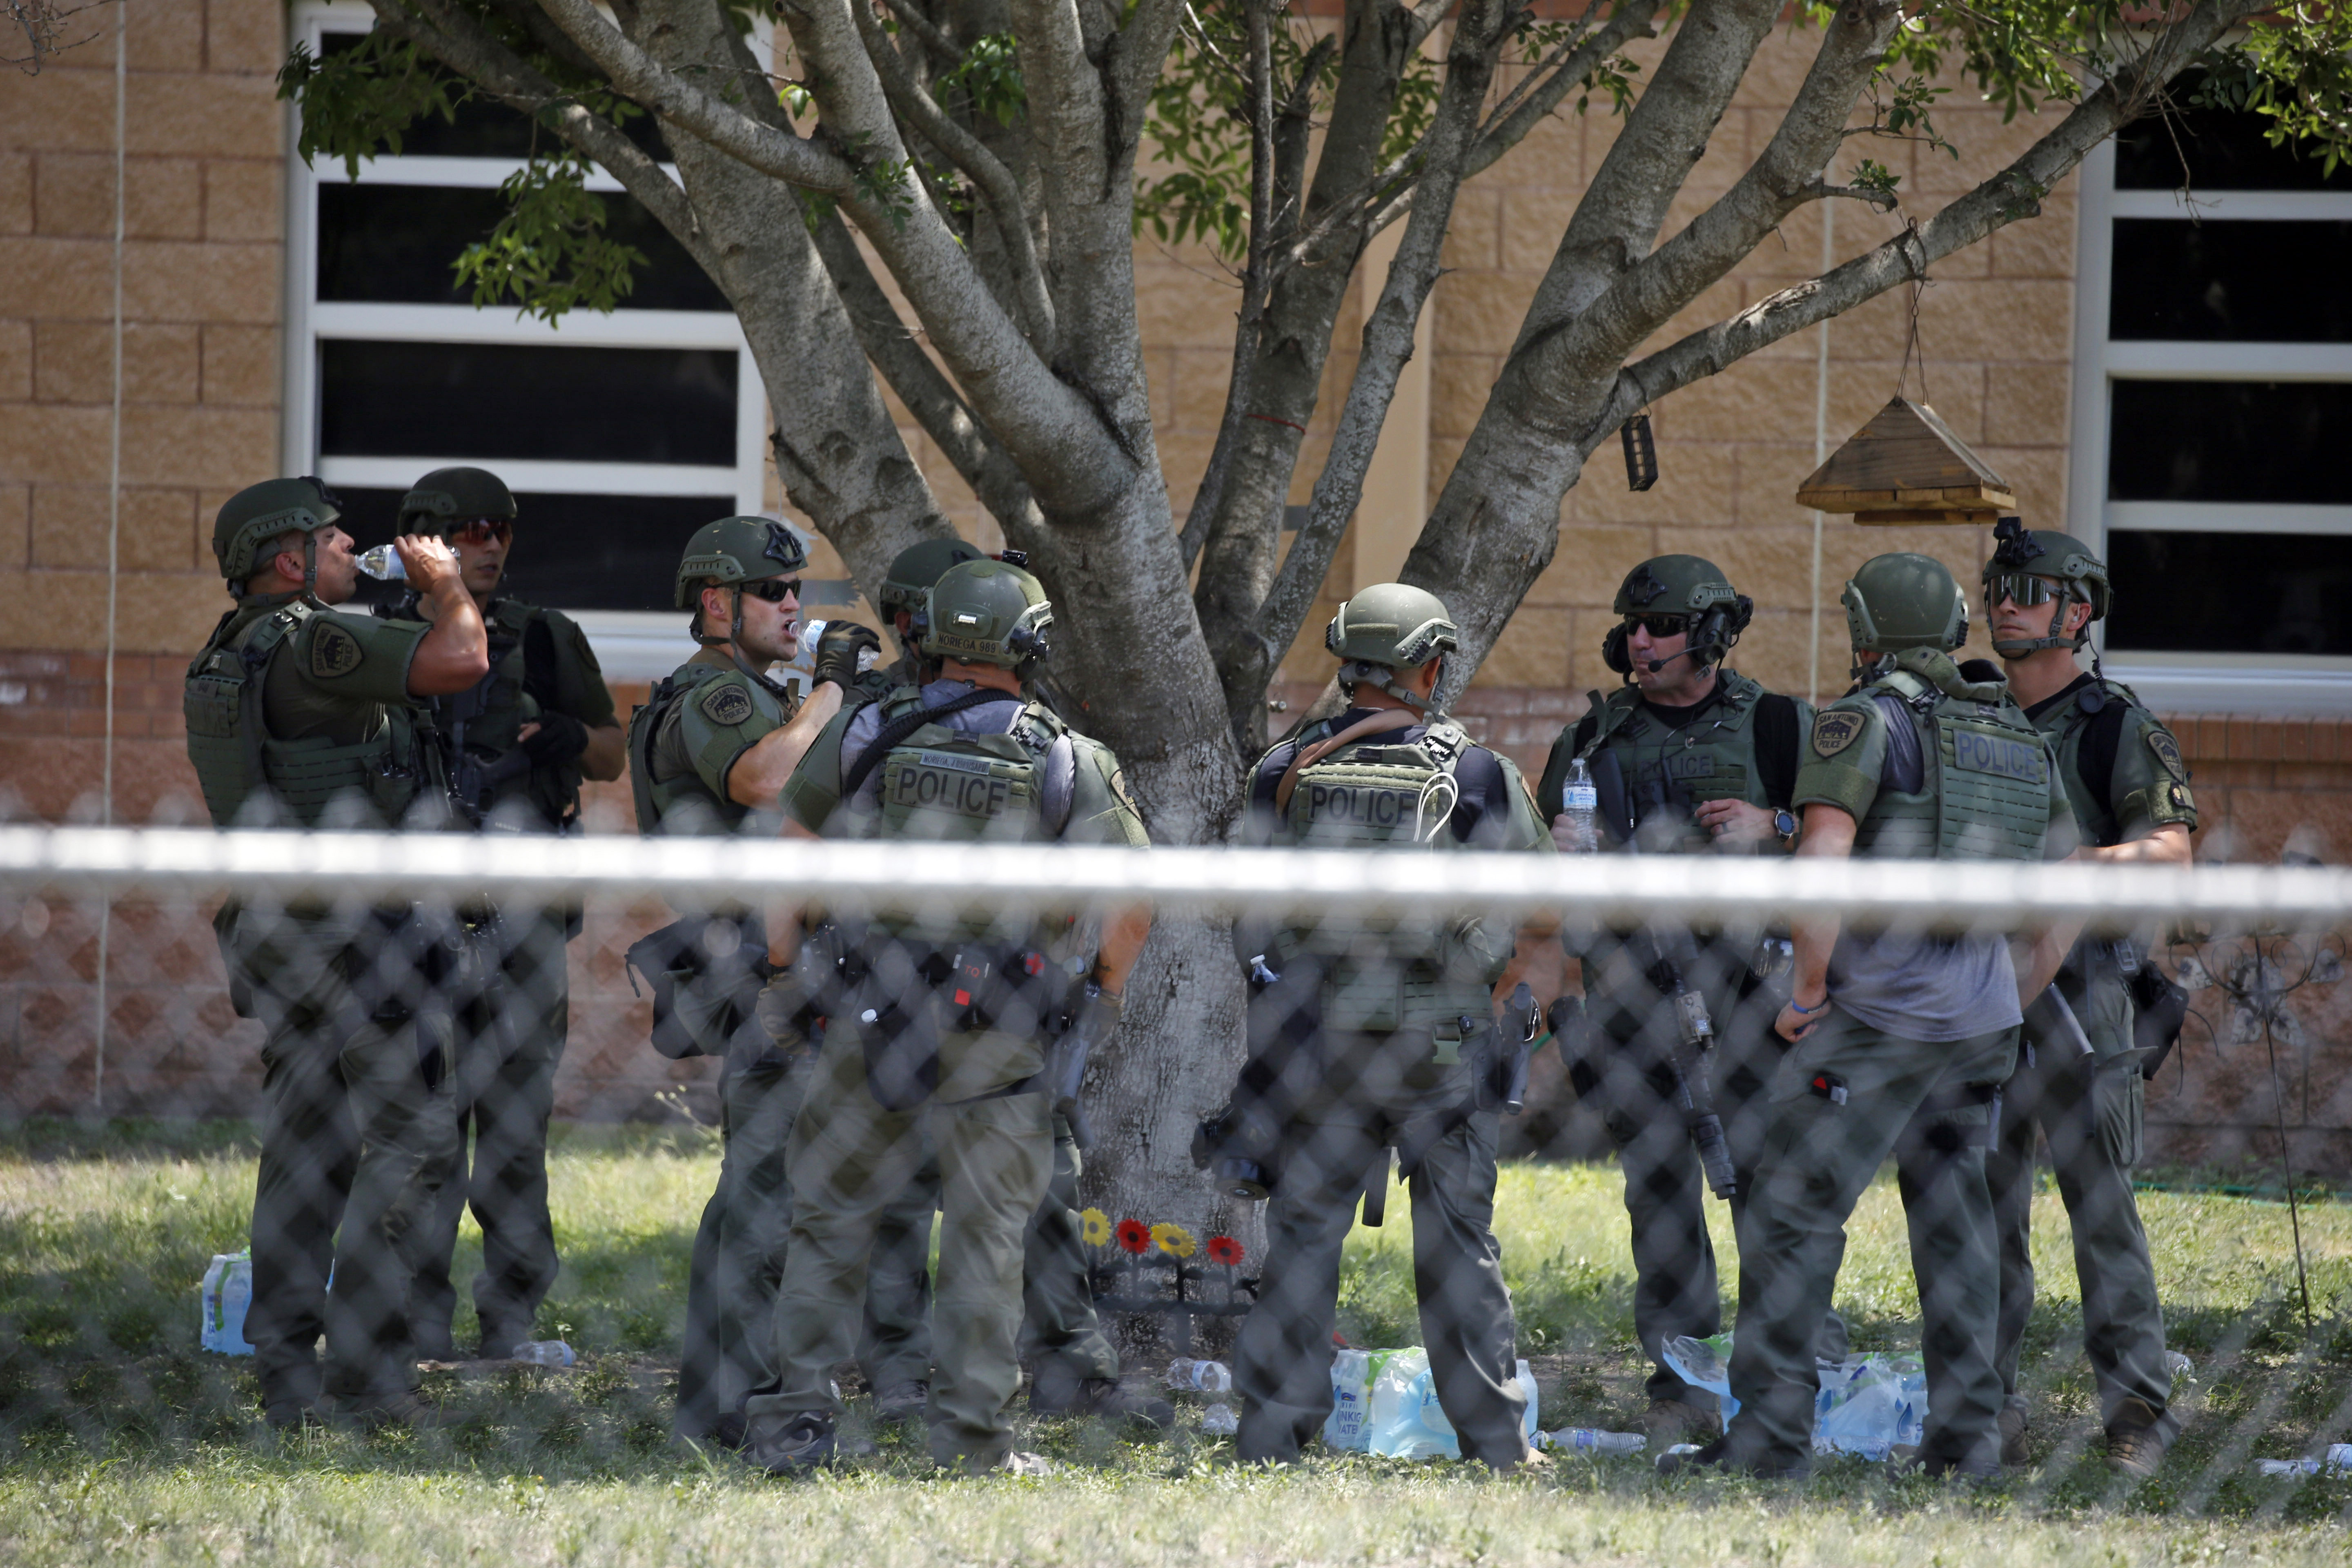 Police find no answers in Texas shooting spree; death toll at 7